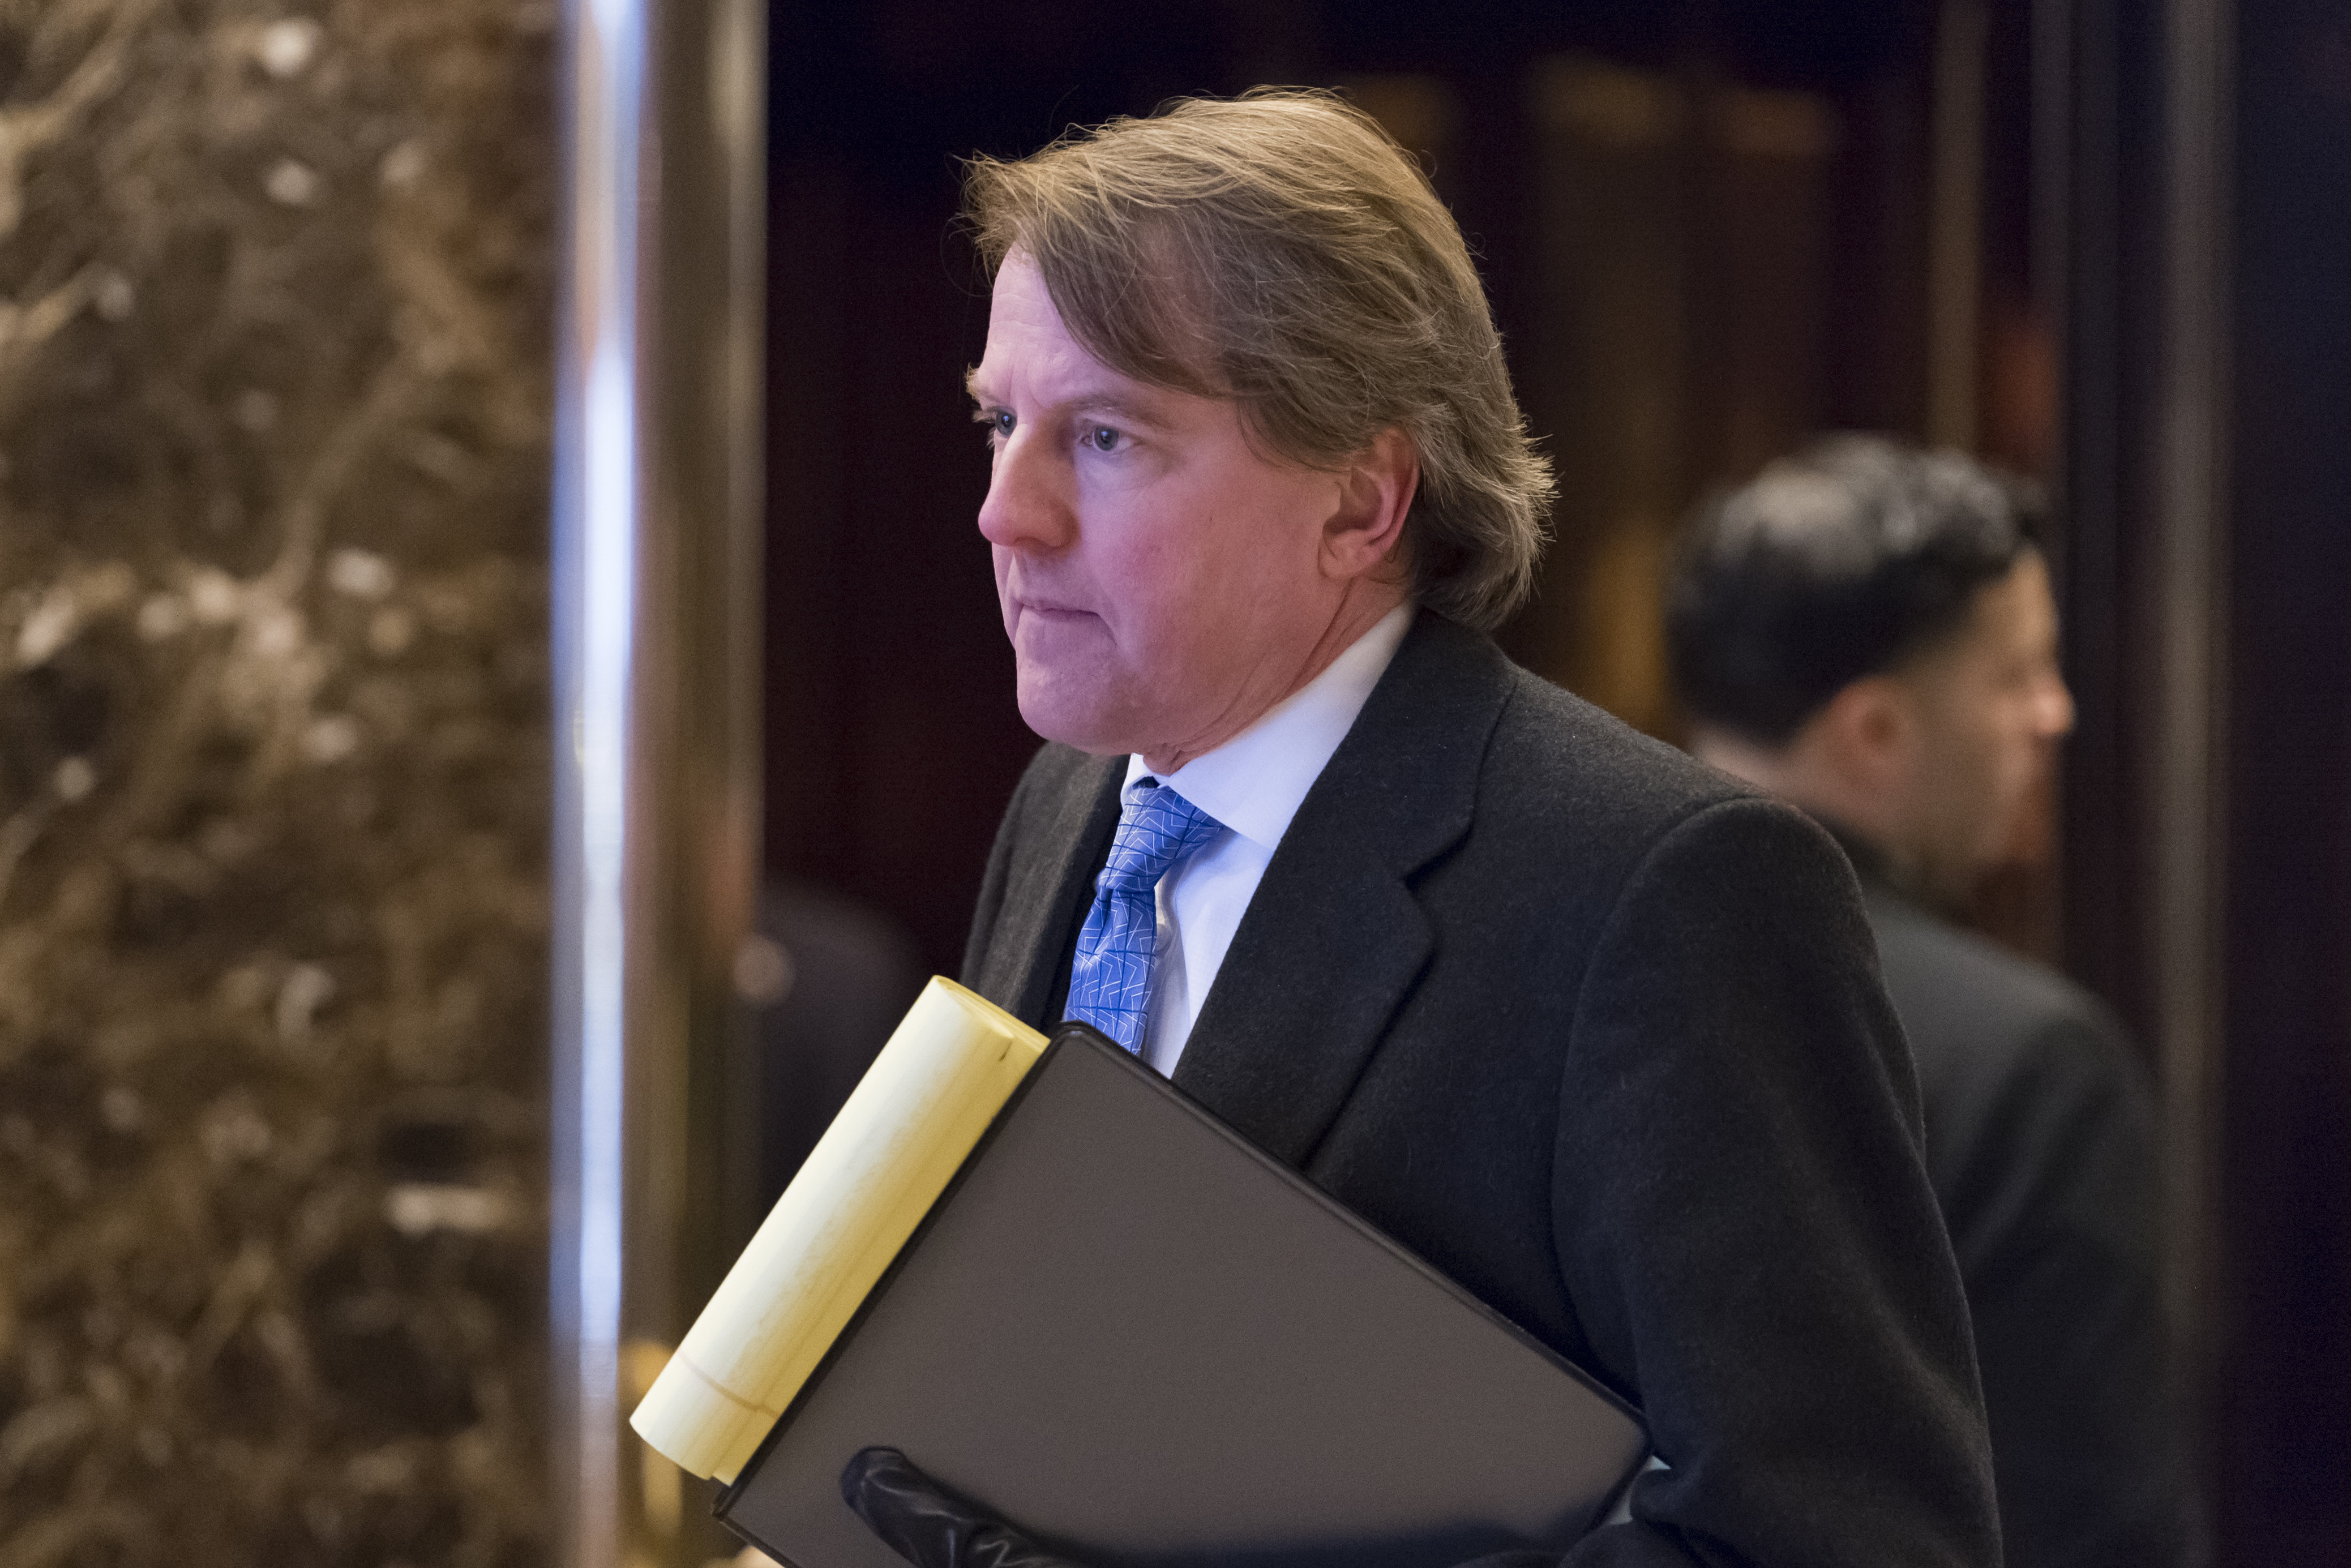 Attorney and United States Federal Election Commission member Don McGahn is seen in the lobby of Trump Tower in New York on Jan. 9, 2017. (Albin Lohr-Jones—Zuma Press)